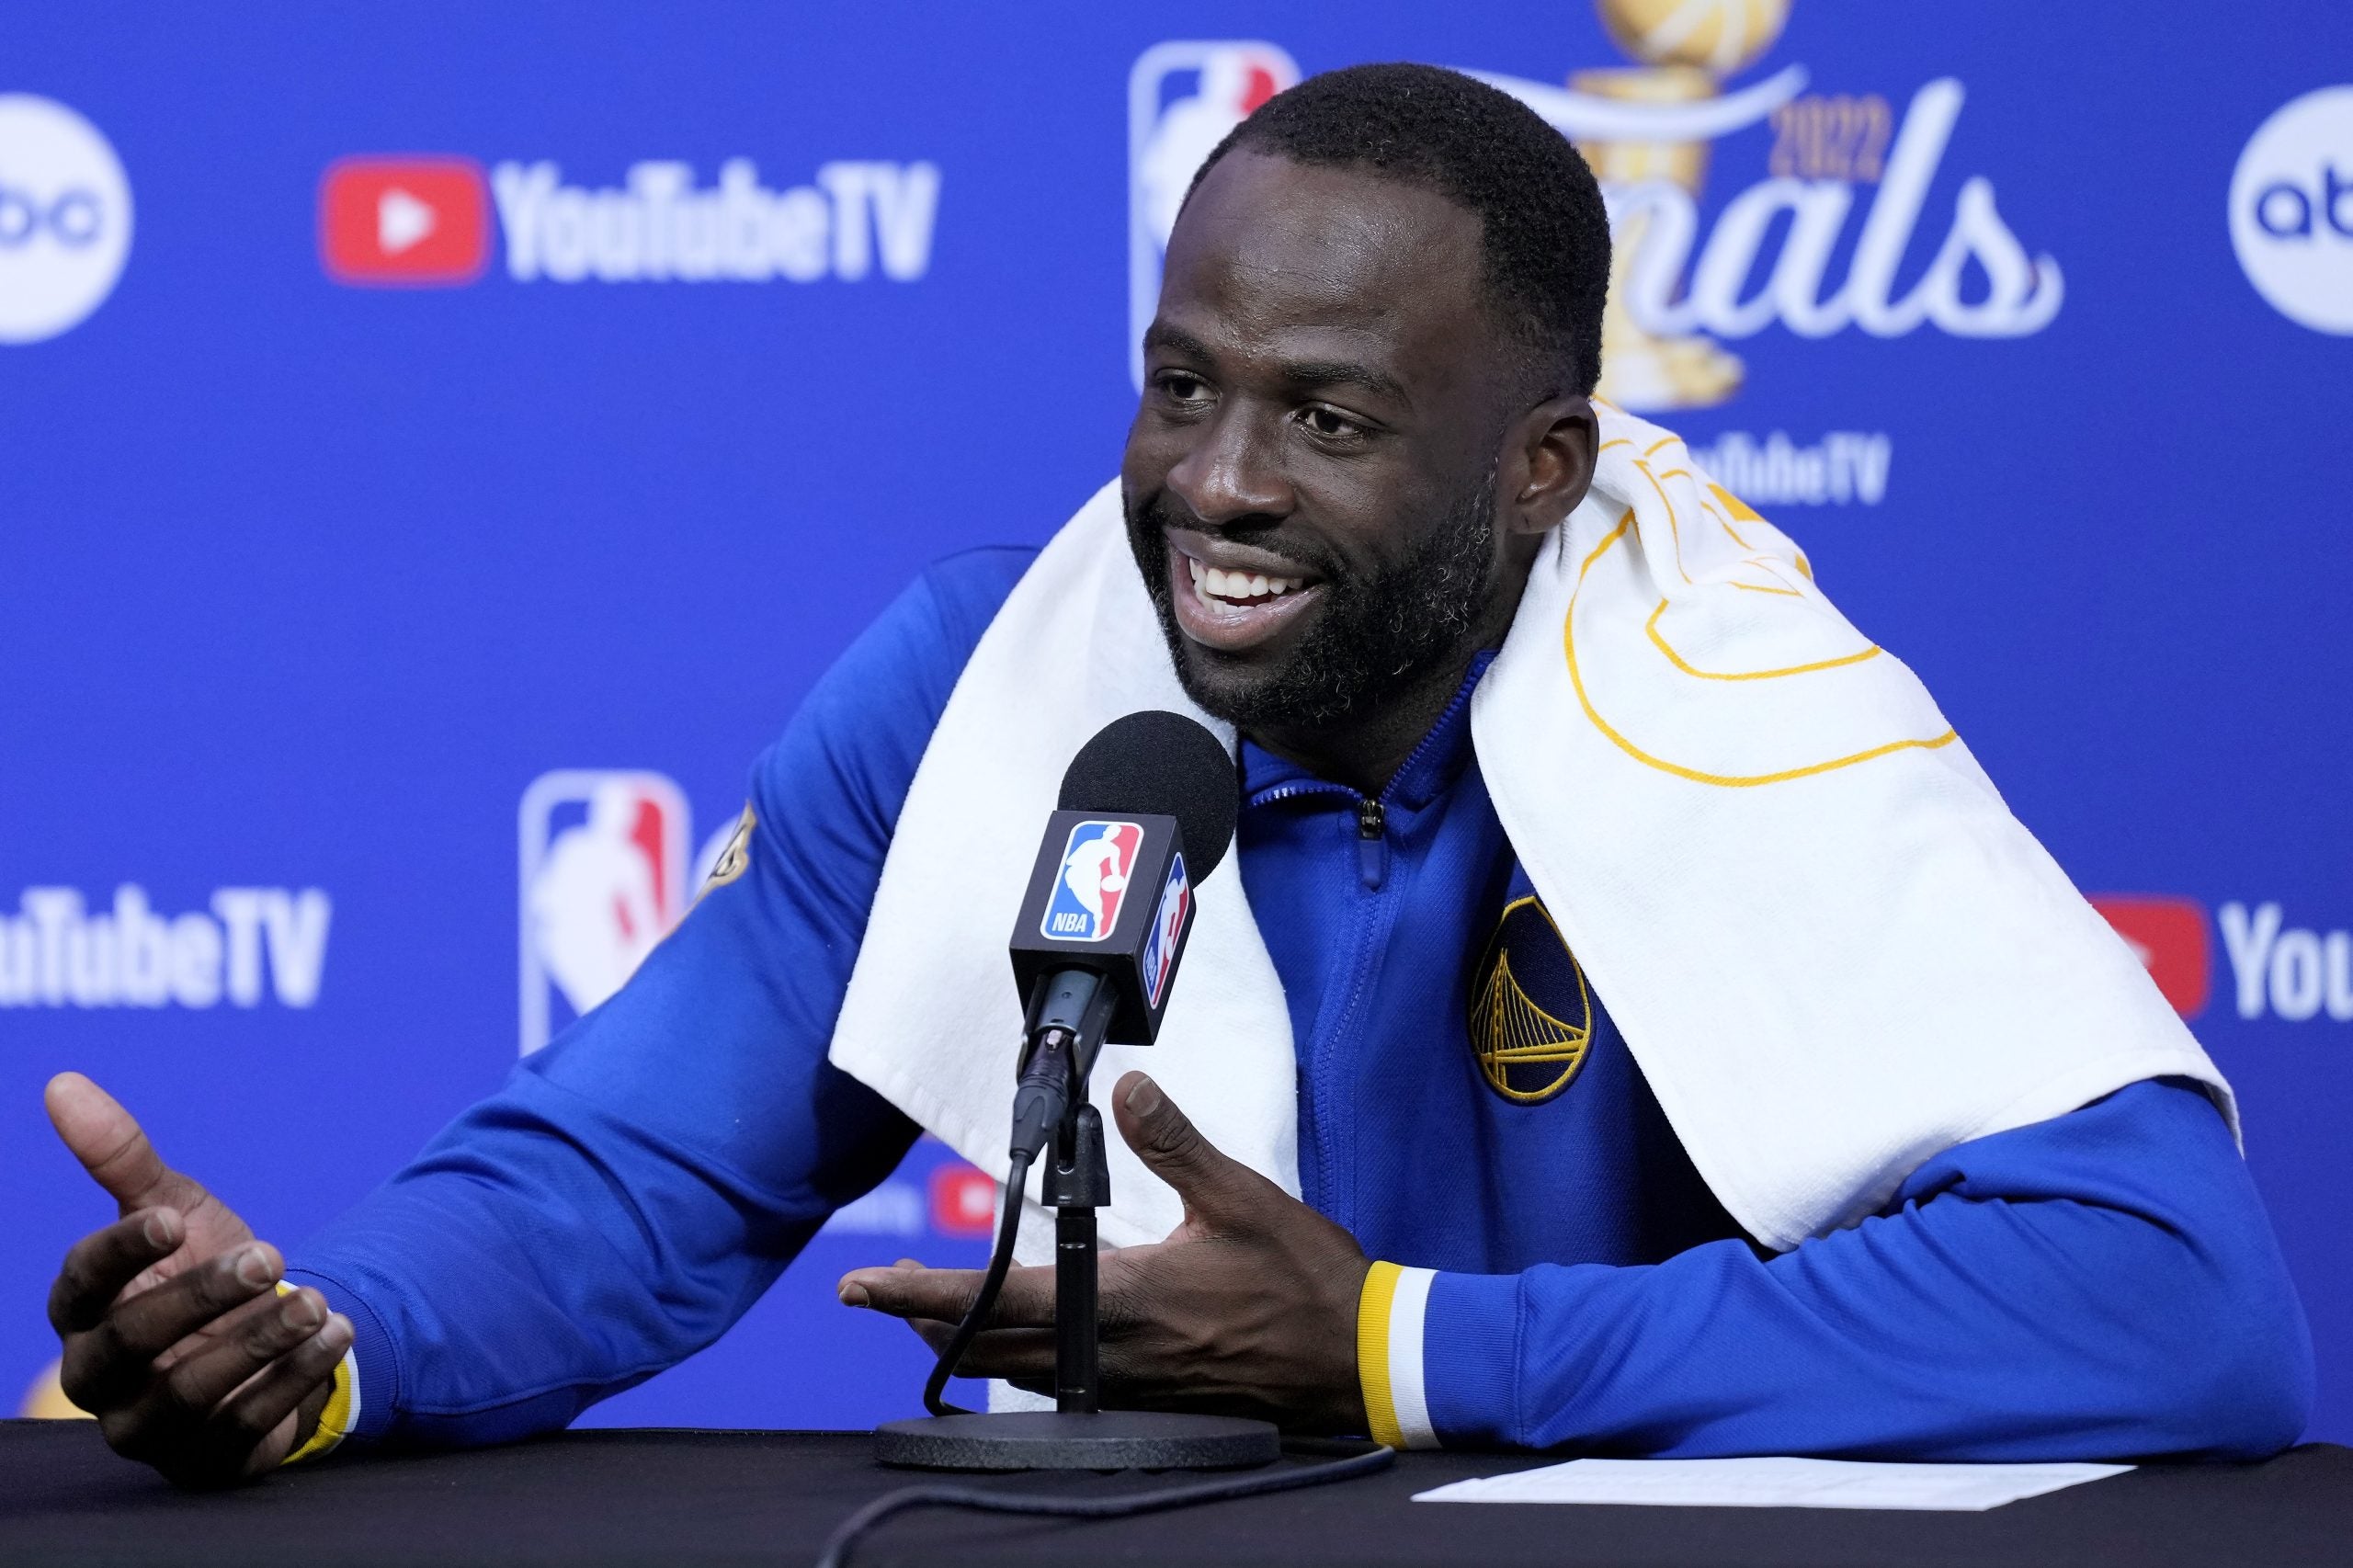 NBA Star Draymond Green Diffuses Conflict Between His Kids During Post-Game Interview